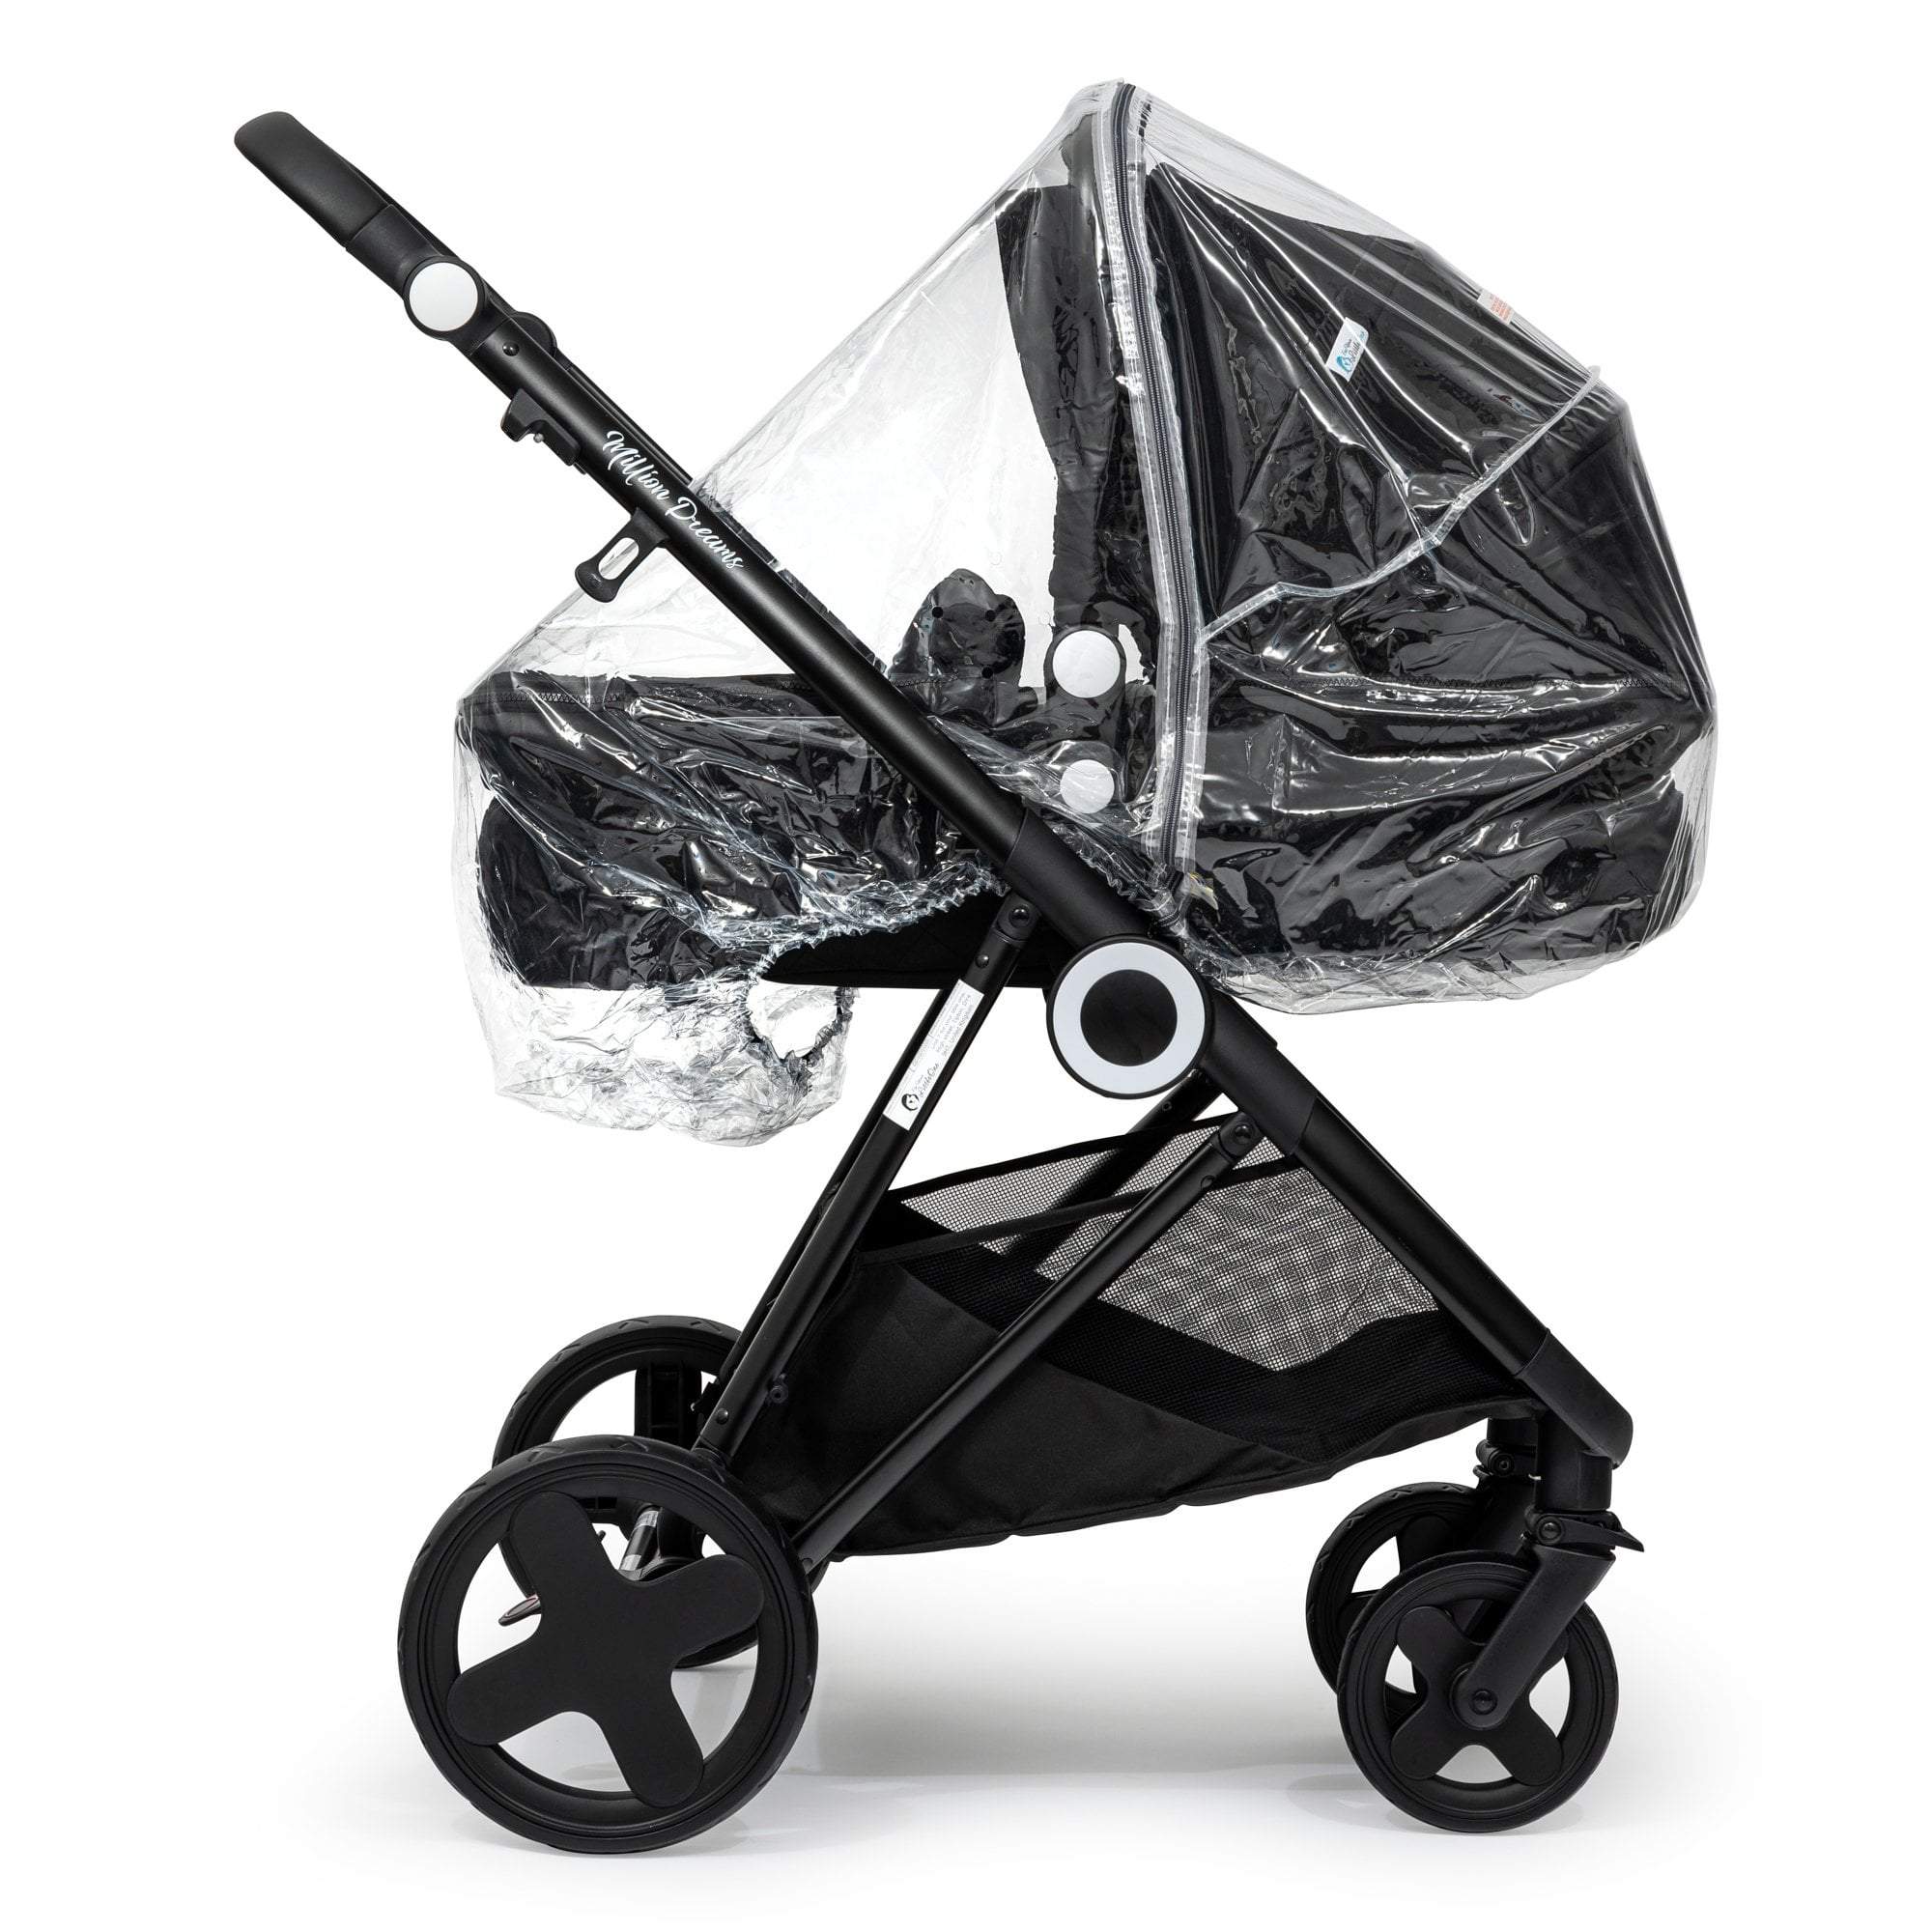 Carrycot Raincover Compatible With Quax - Fits All Models - For Your Little One